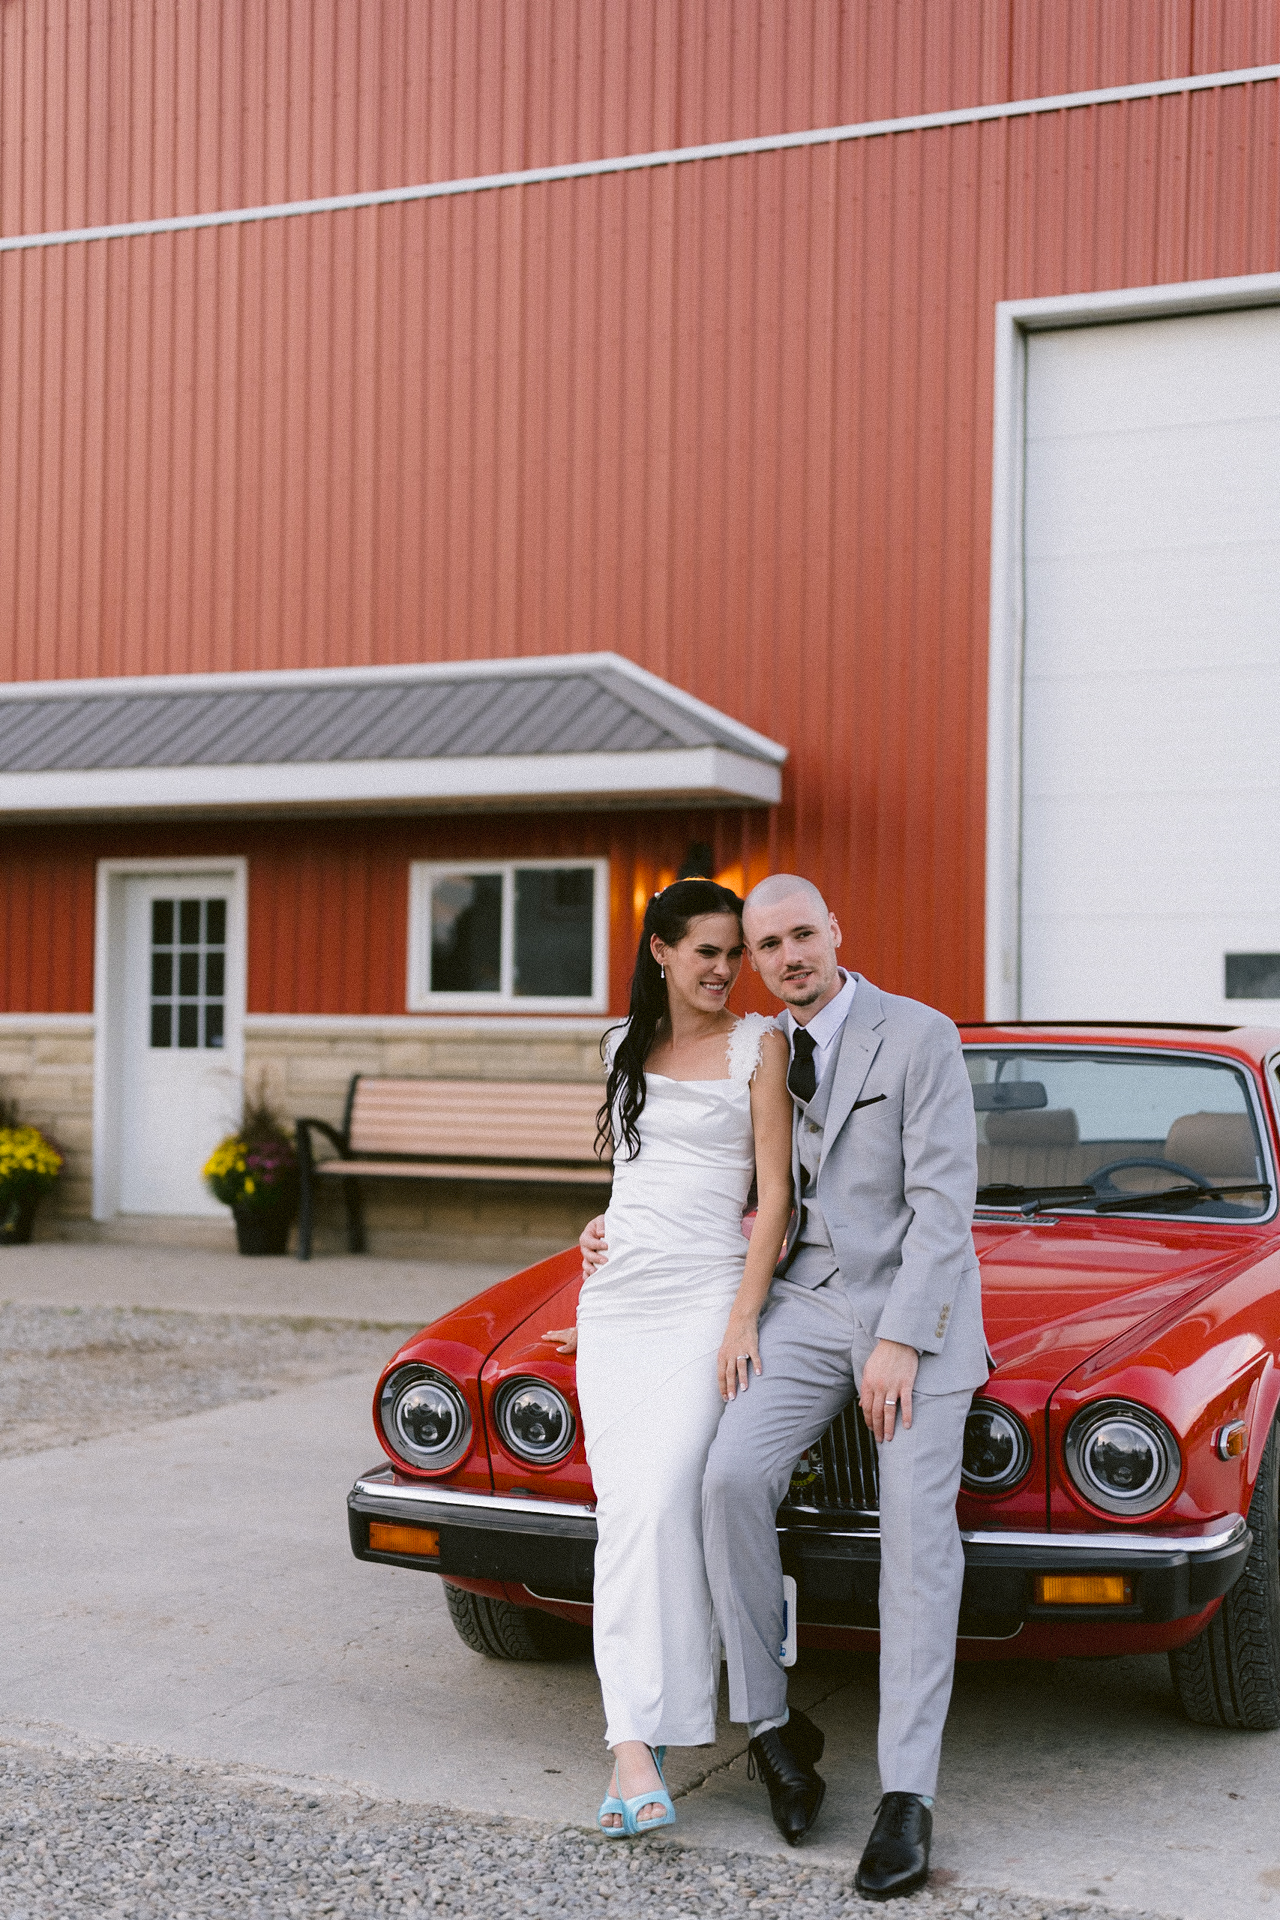 Newlyweds in front of a classic red car